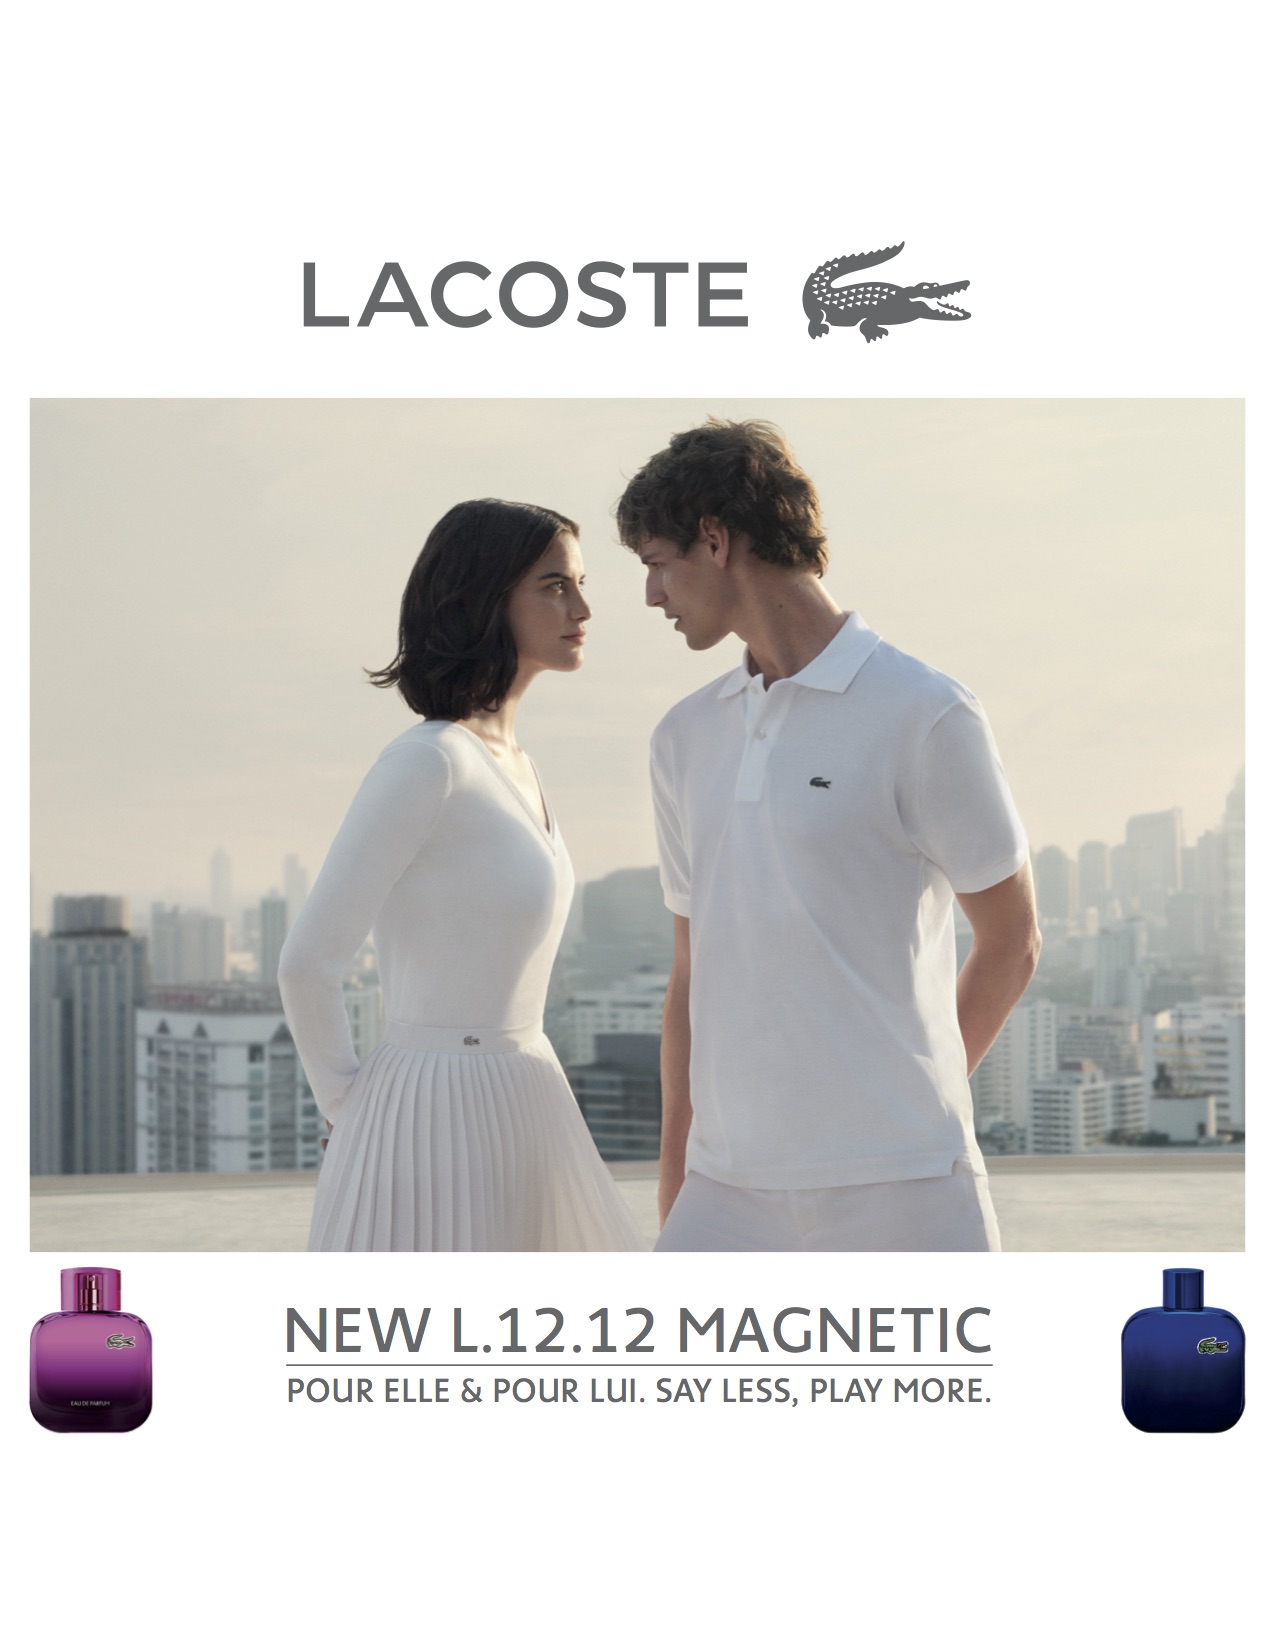 Magnetic attraction: The Magnetic fragrances are the latest additions to the Eau de Lacoste L. 12. 12 range 